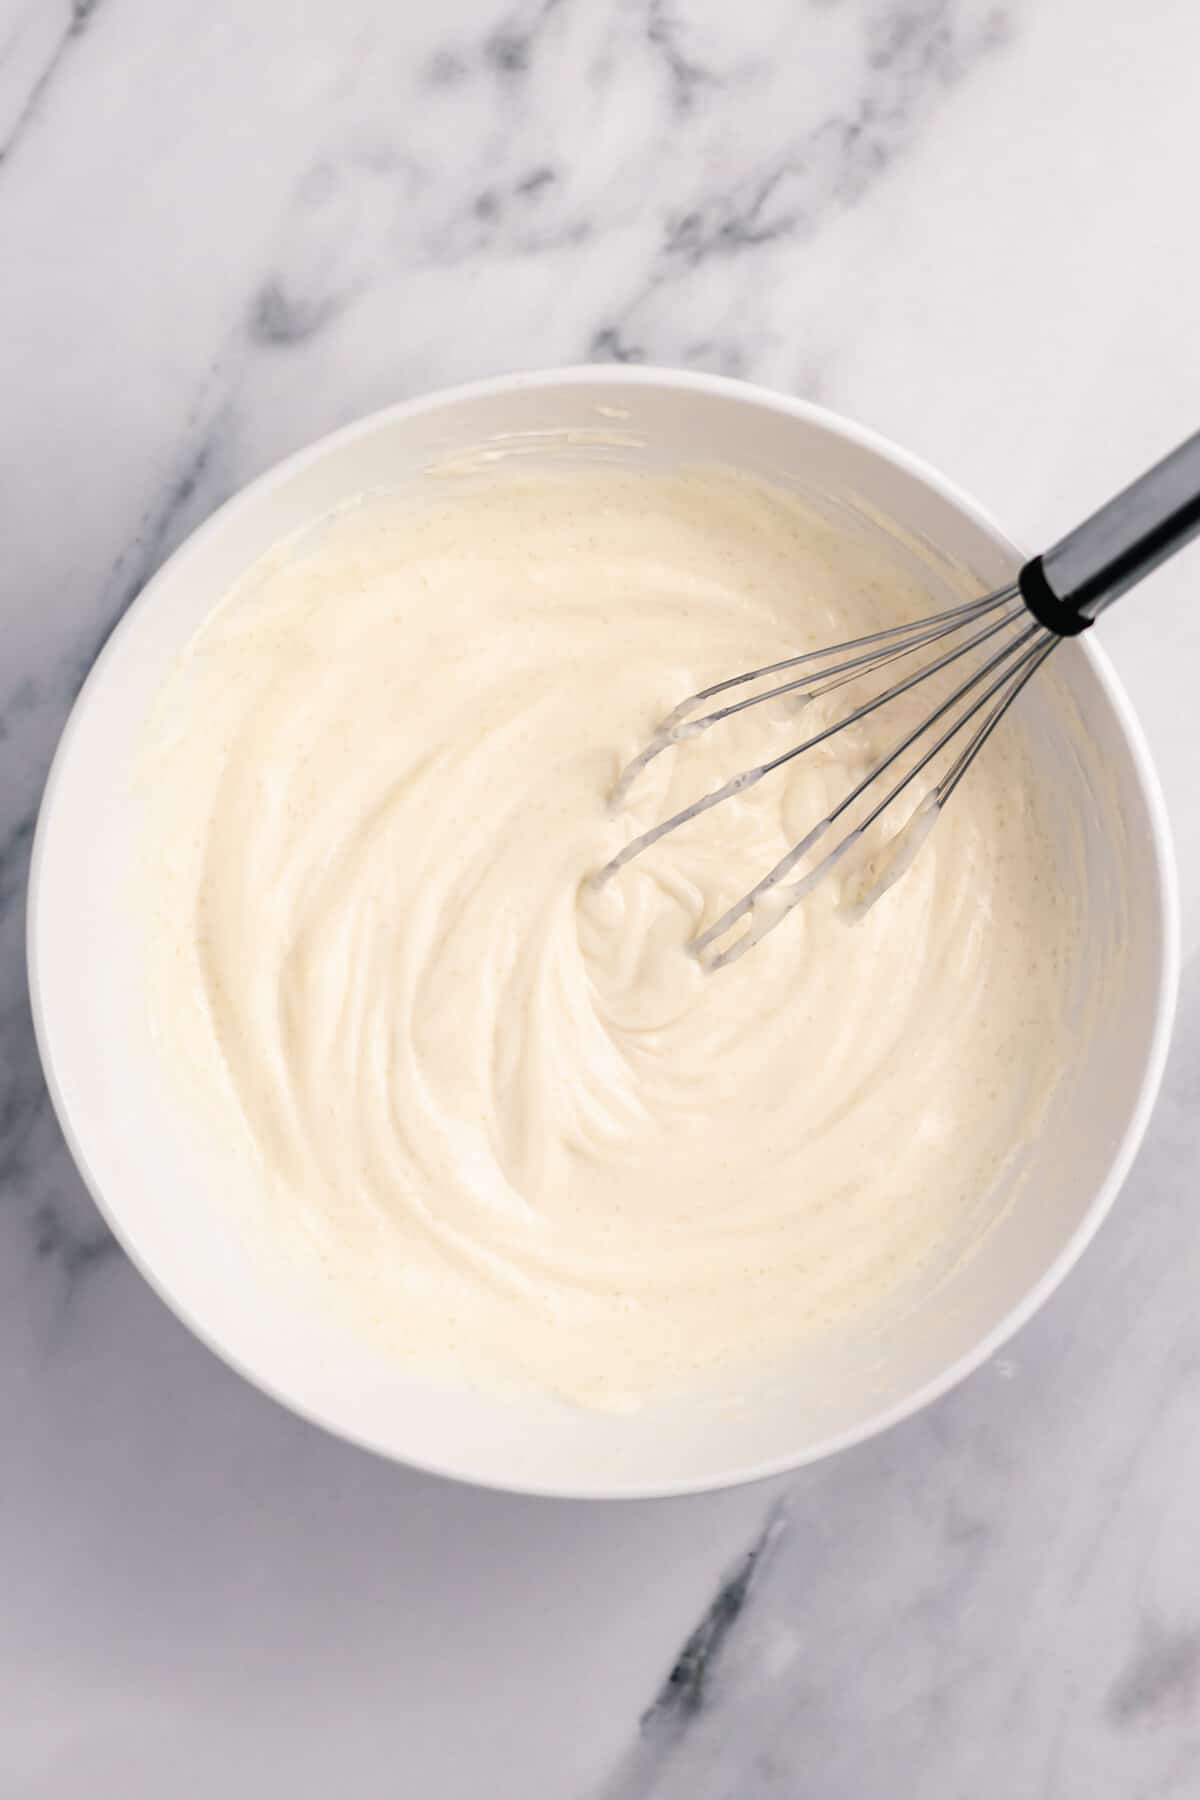 cream cheese mixture in a small bowl